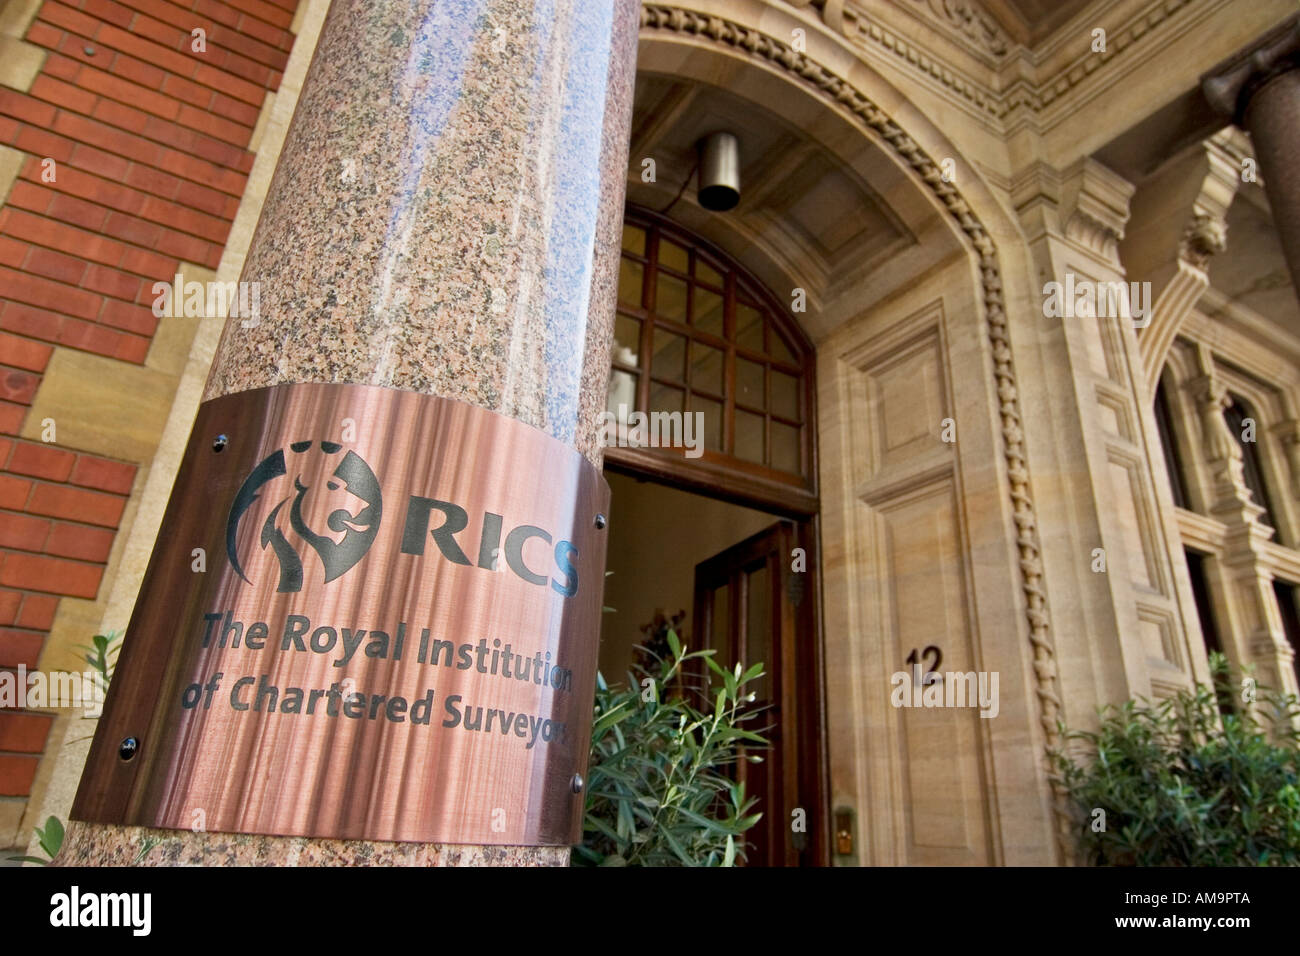 Royal Institute of Chartered Surveyors building on Parliament Square London Stock Photo